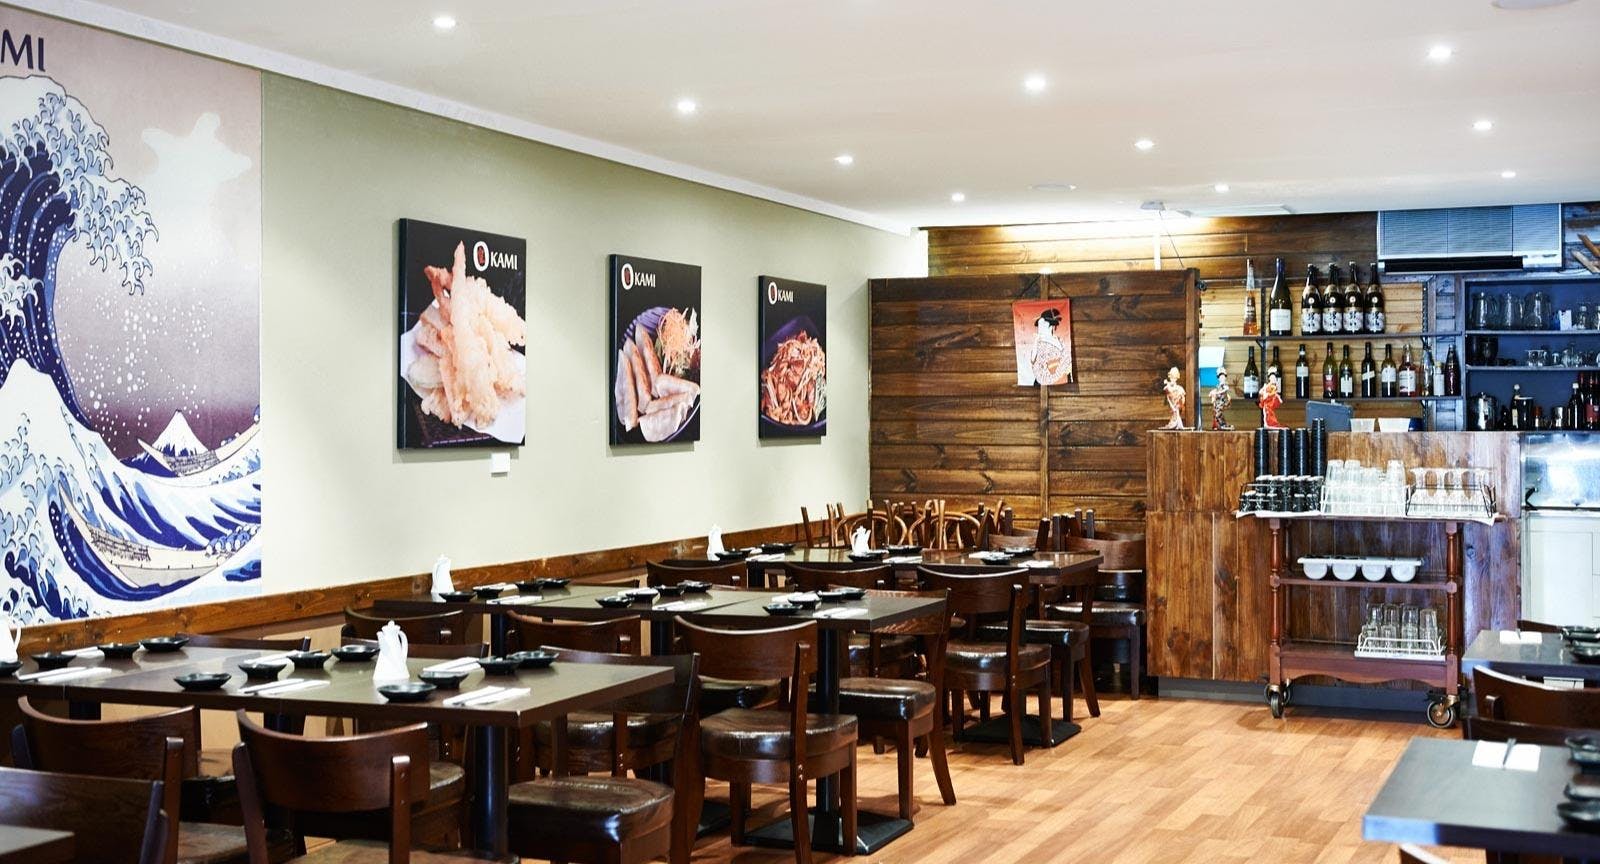 Photo of restaurant OKAMI - Wantirna in Wantirna South, Melbourne